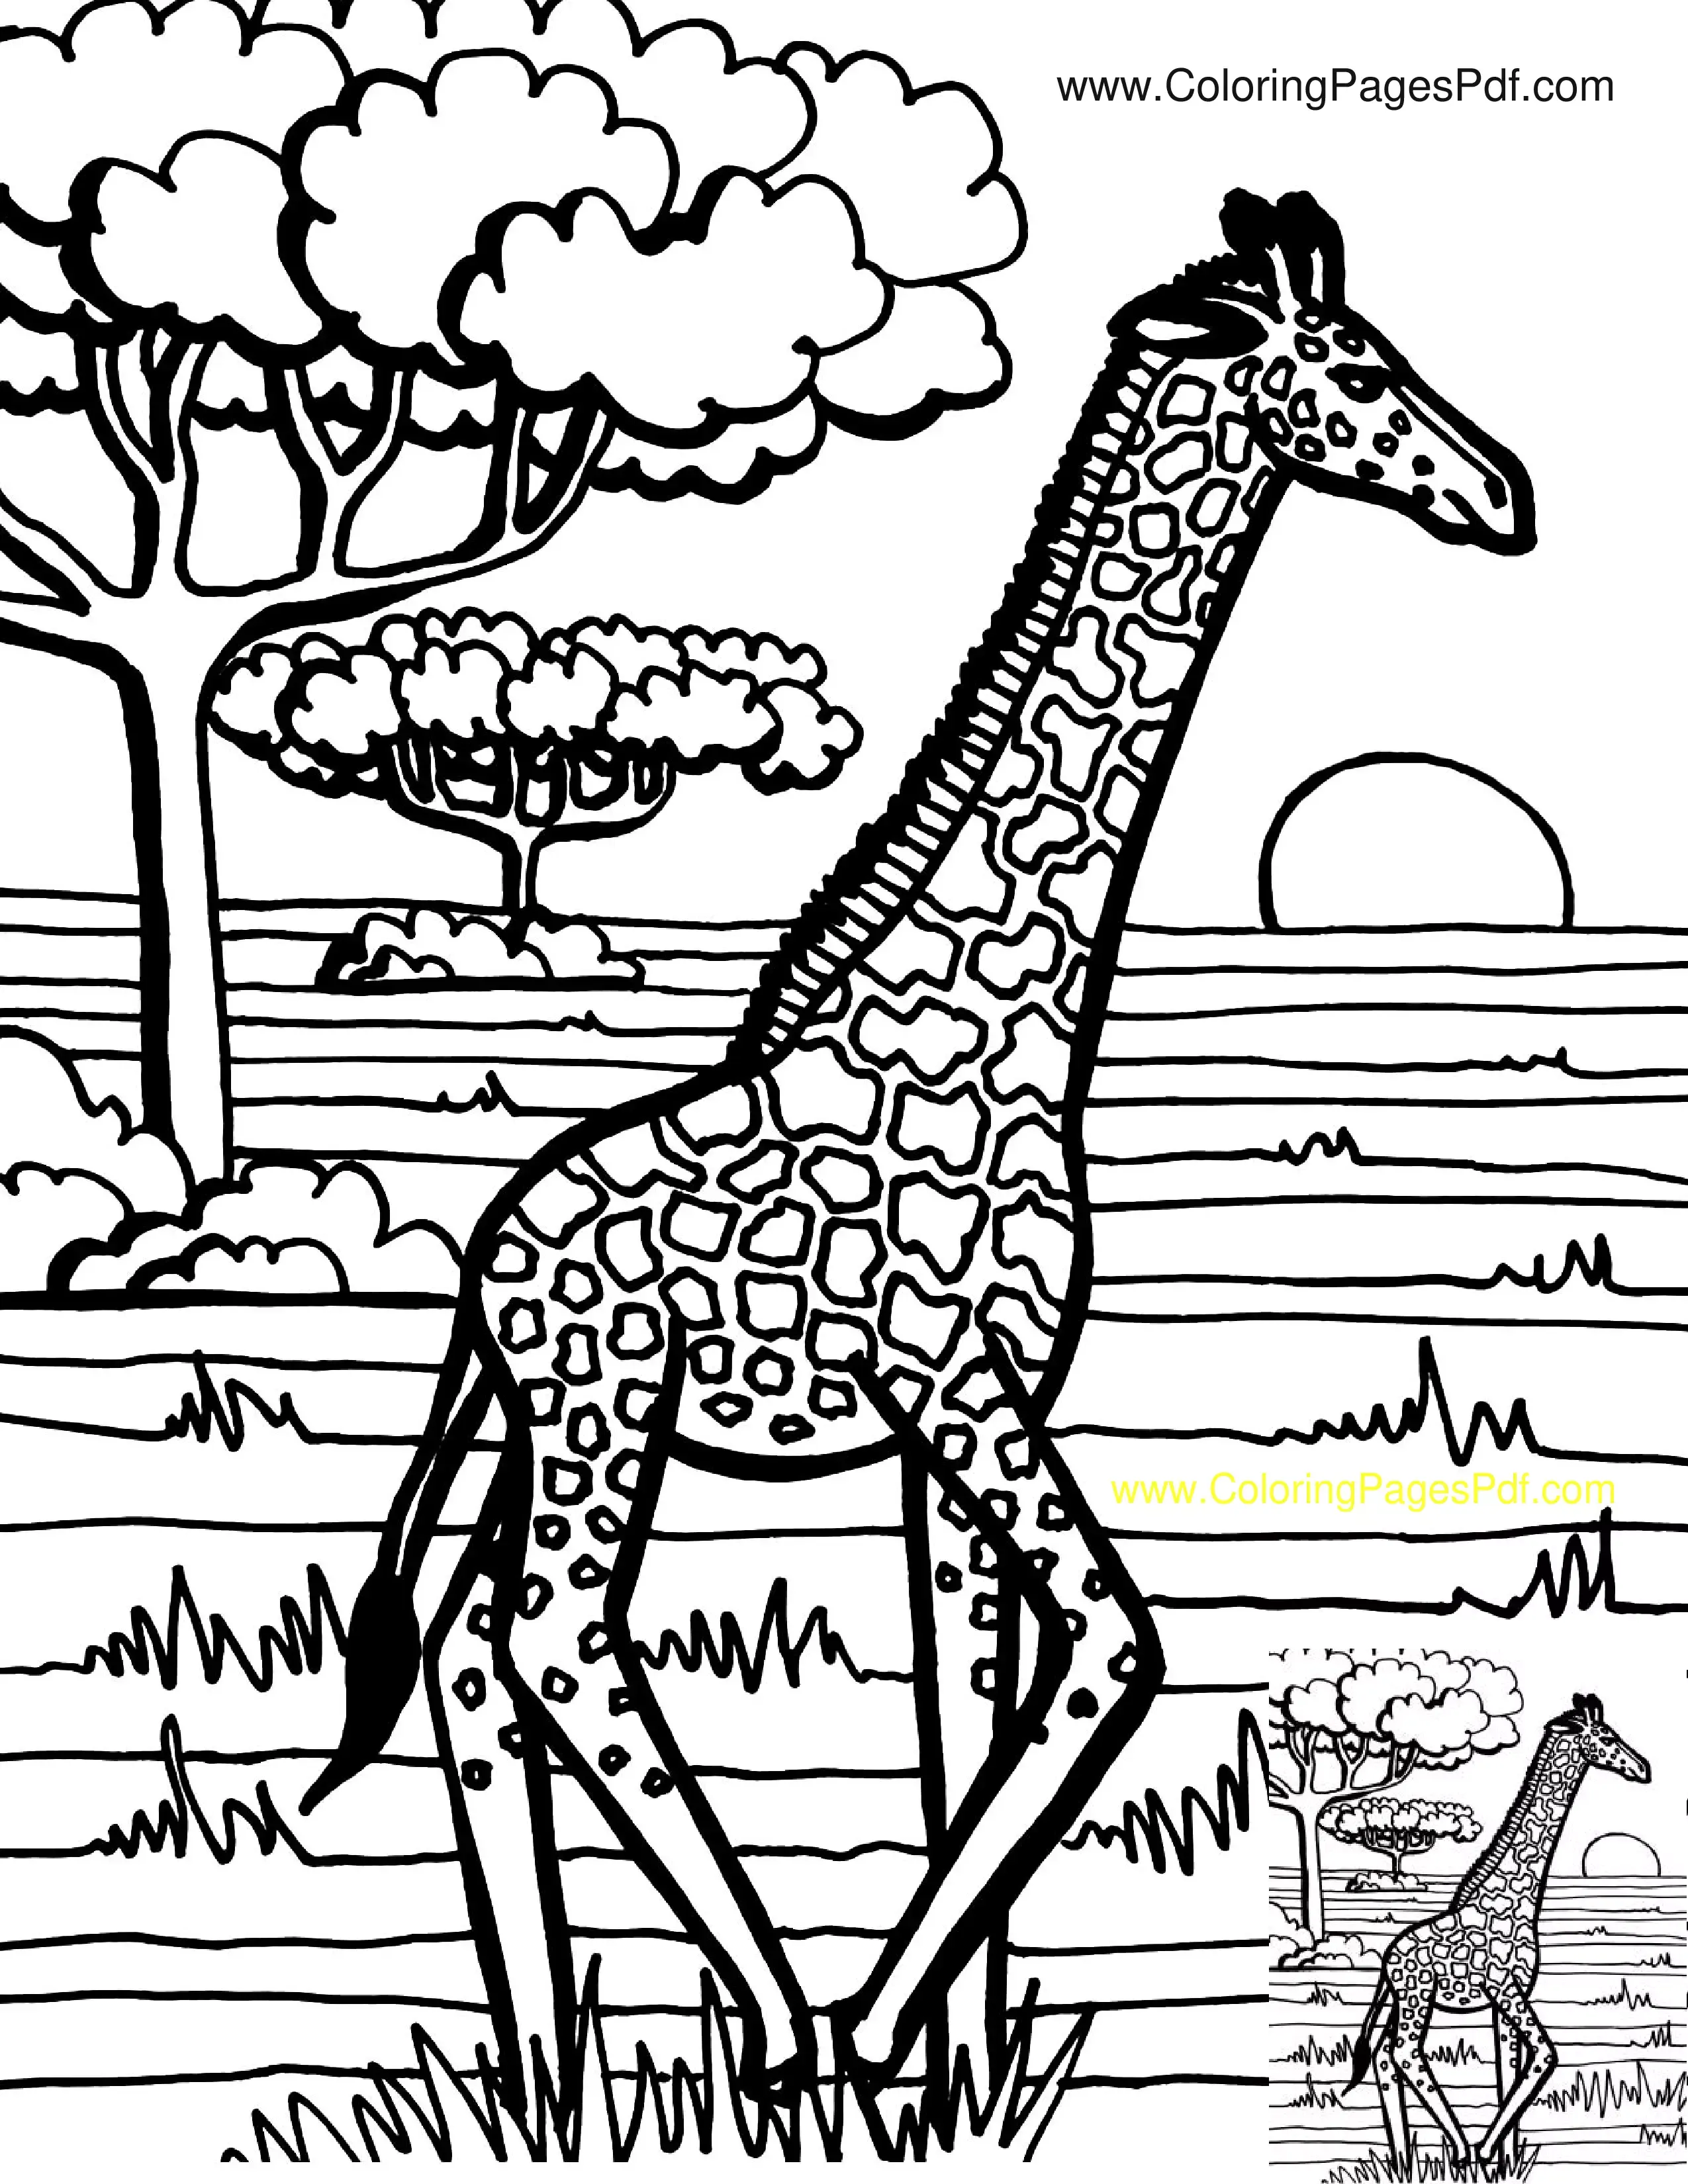 Giraffe coloring pages printable